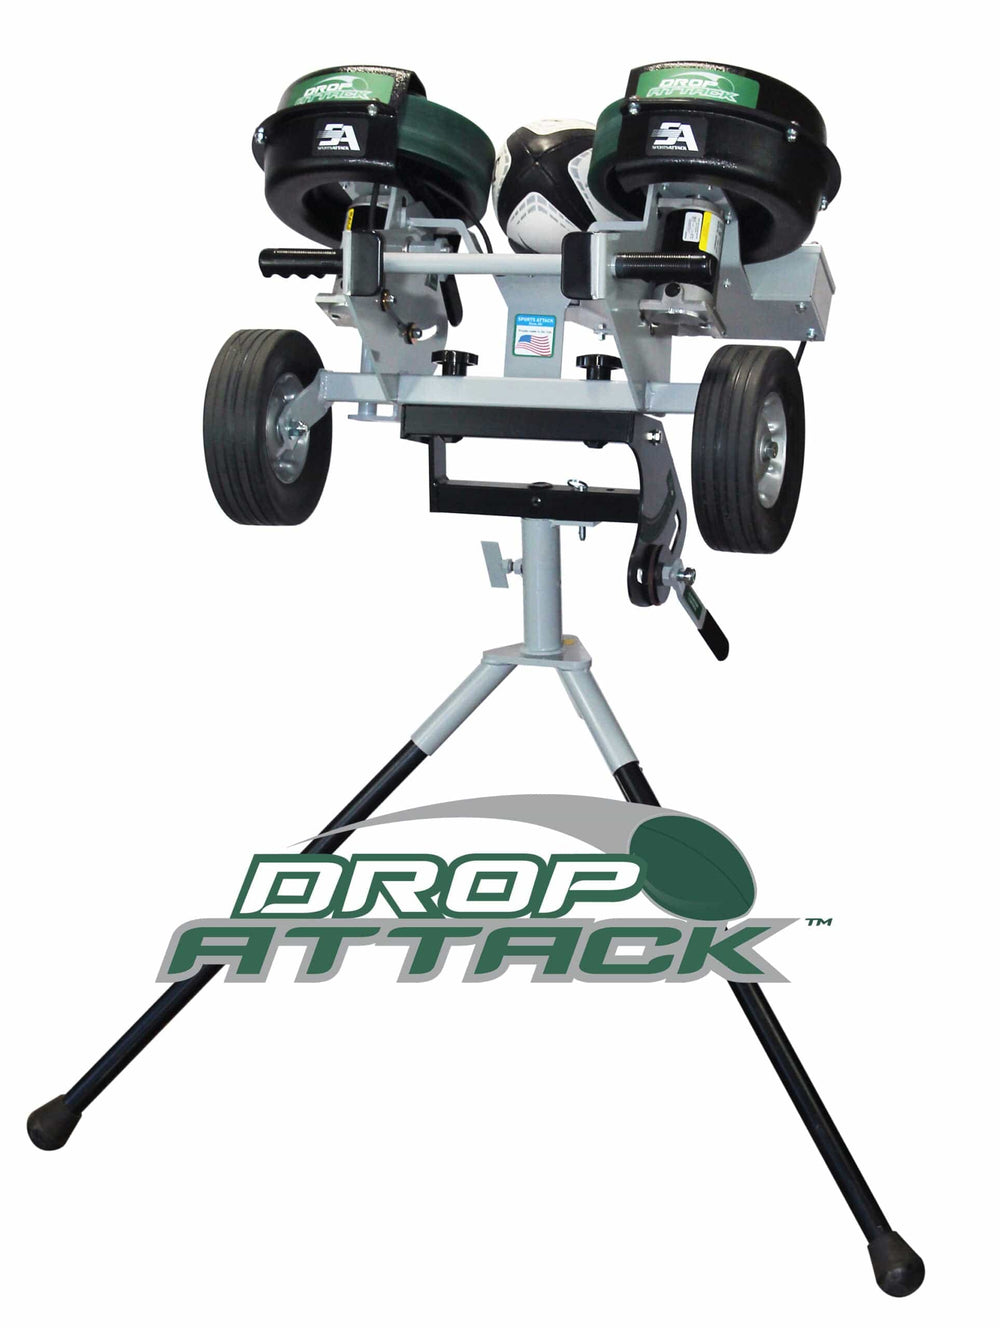 Sports Attack Machines and Accessories Drop Attack Rugby Machine | Sports Attack